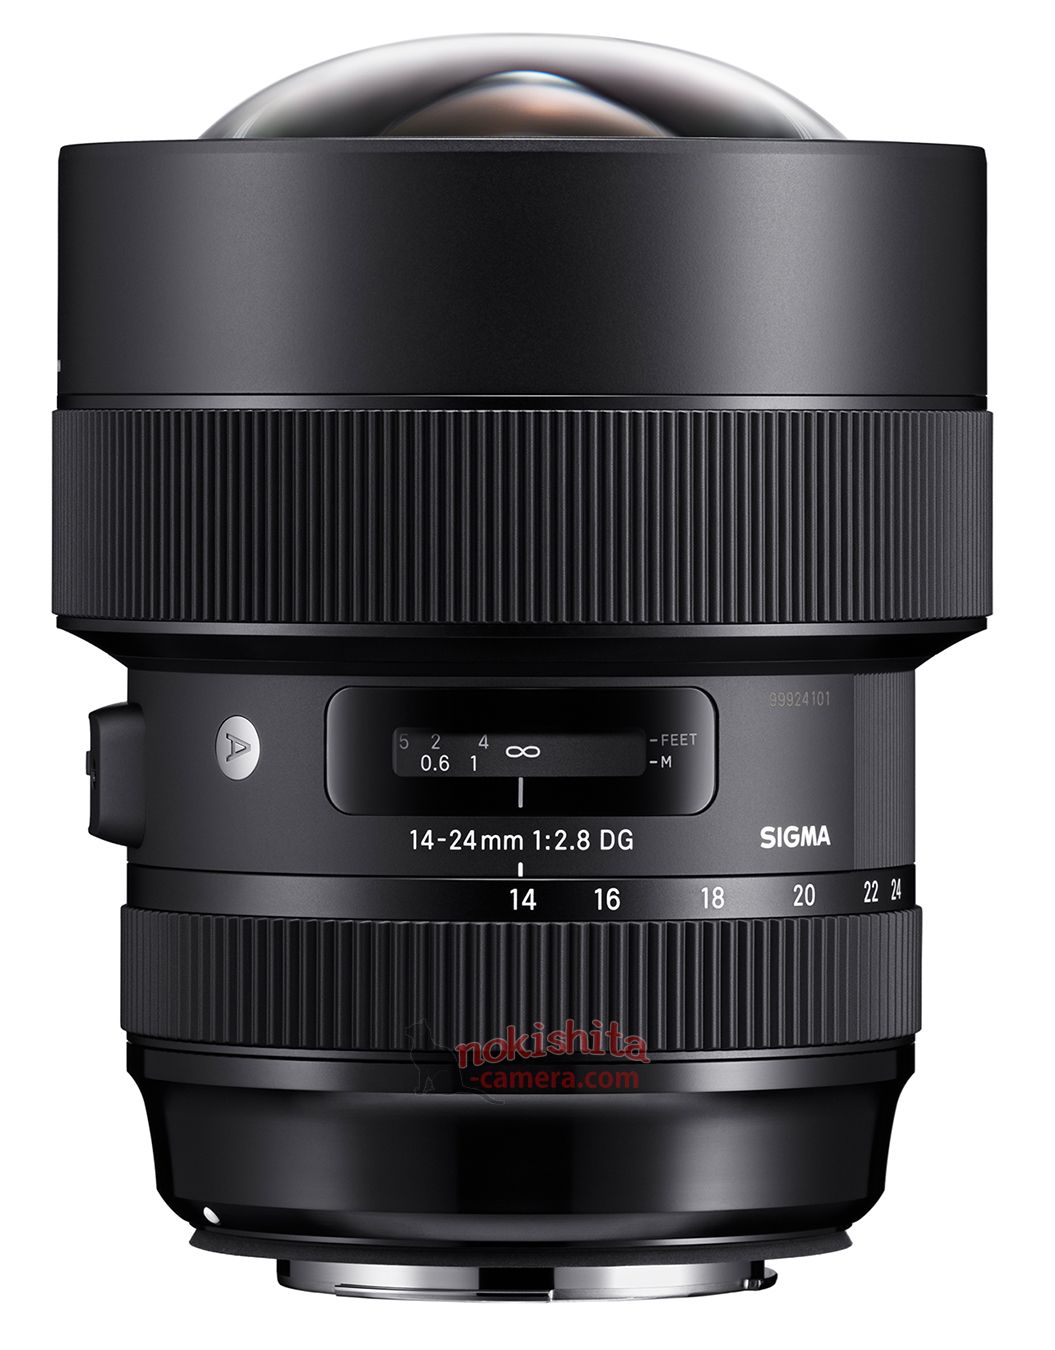 First pictures of the Sigma 14-24mm f/2.8 DG HSM Art lens - Nikon Rumors